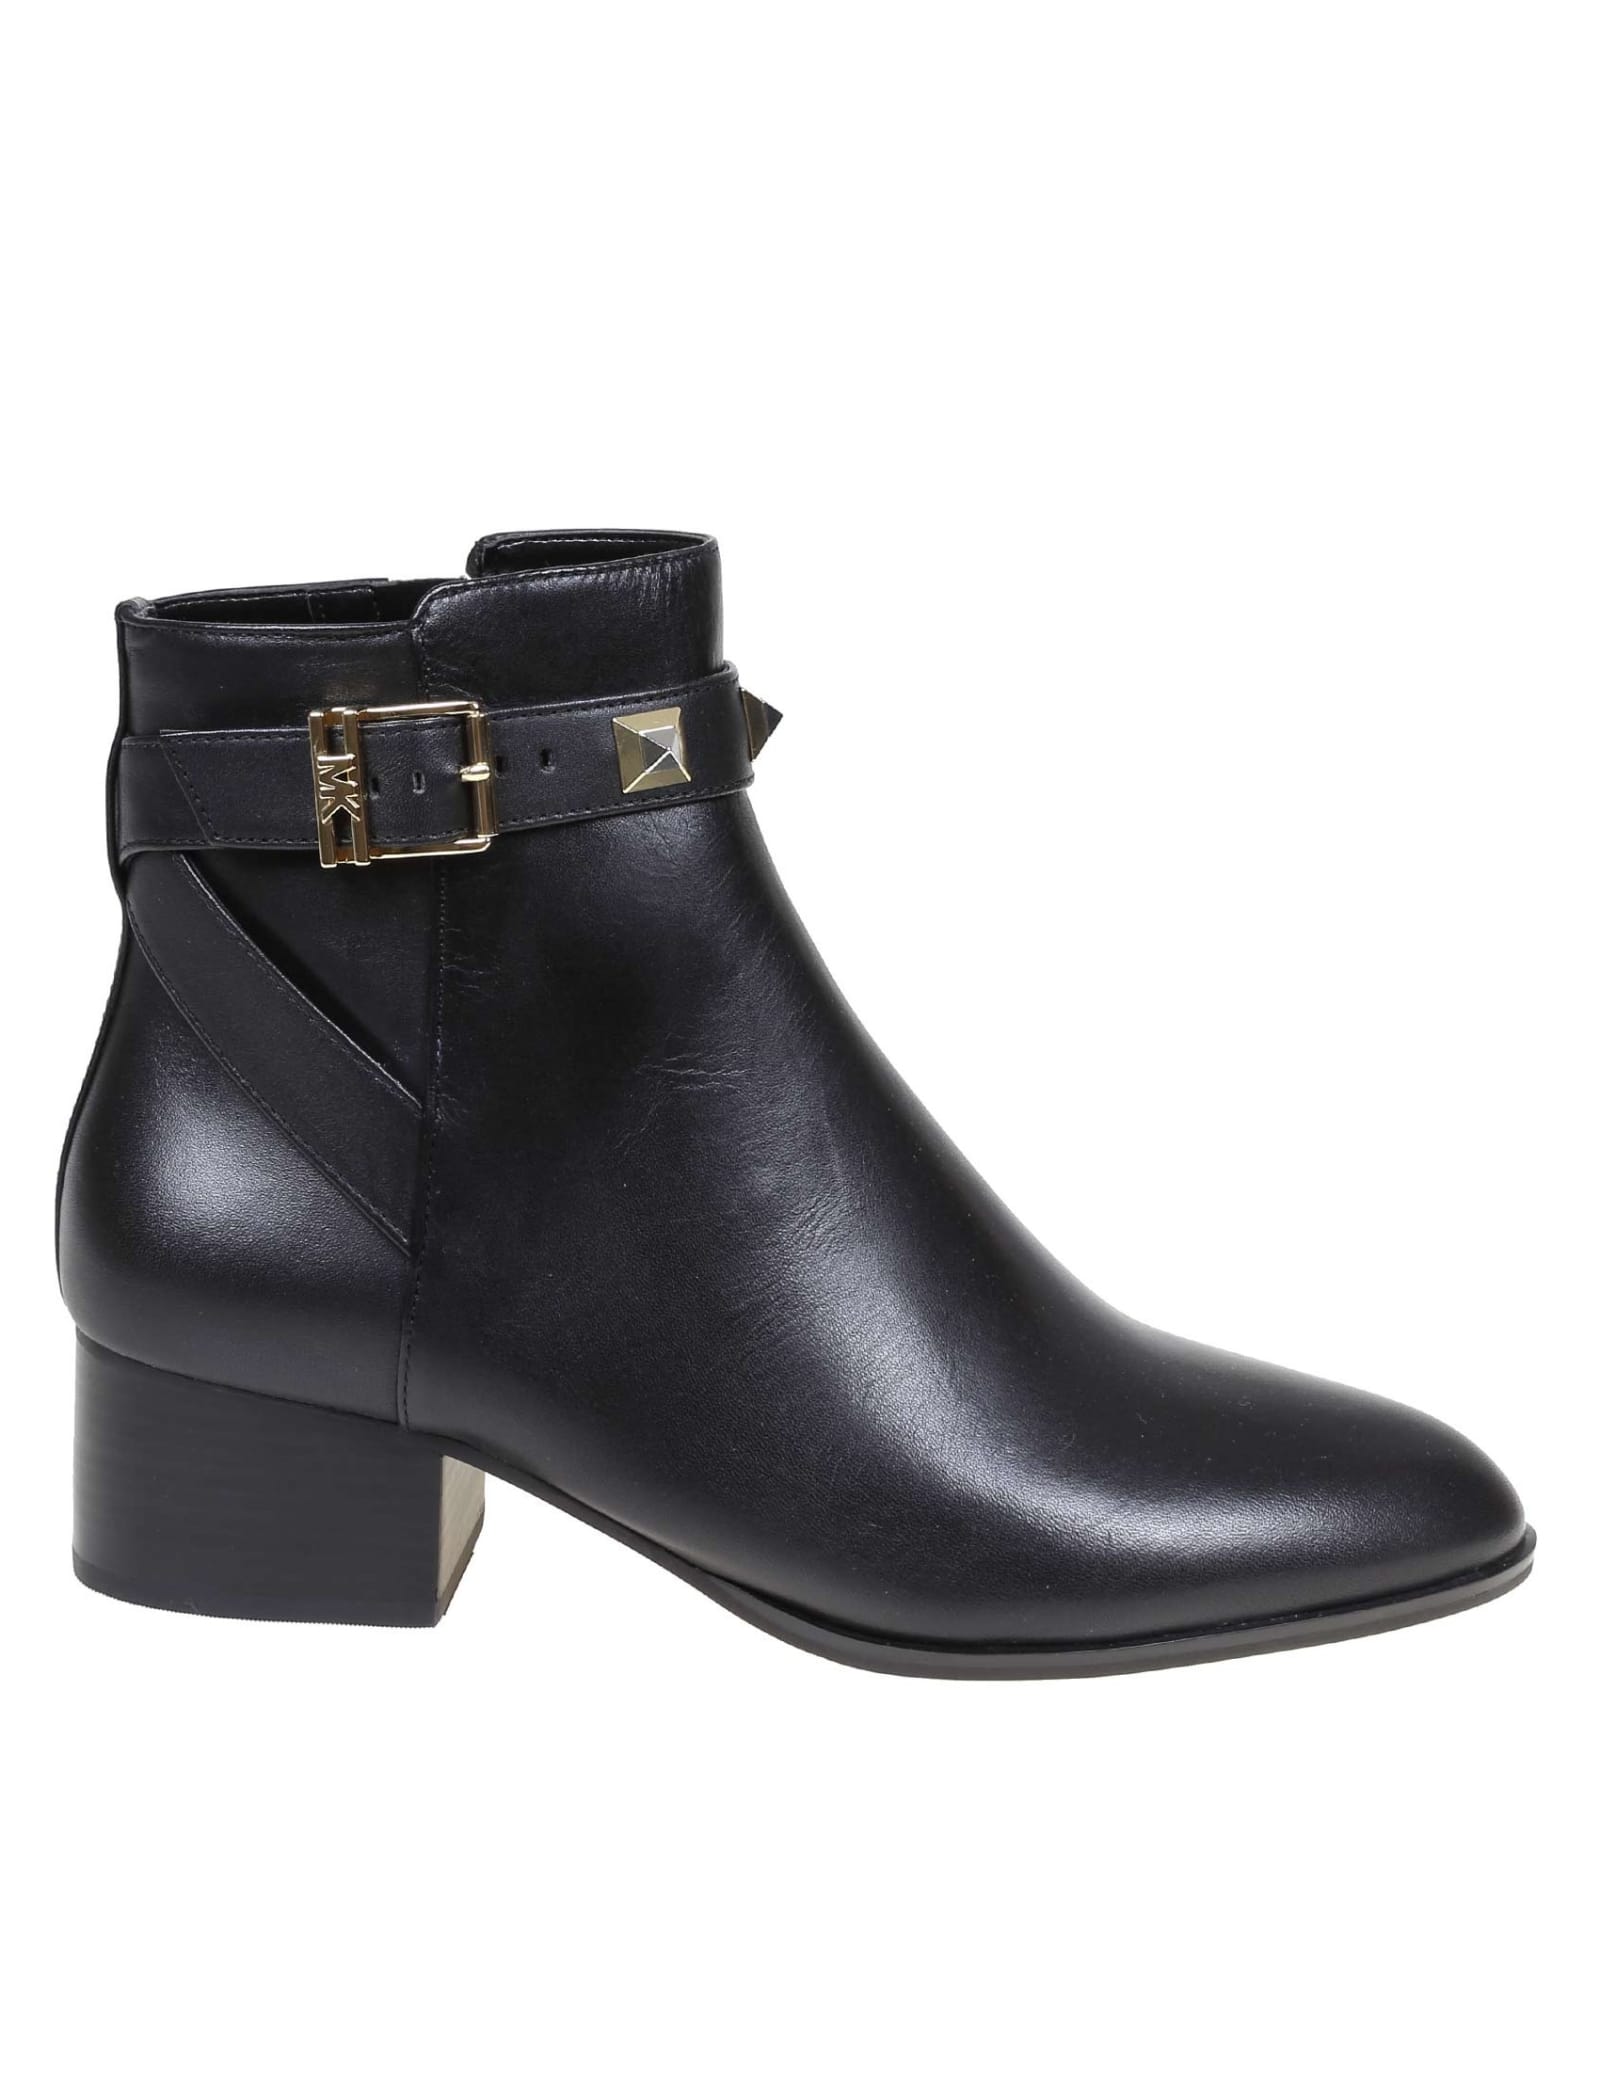 Michael Kors Britton Boots In Black Leather